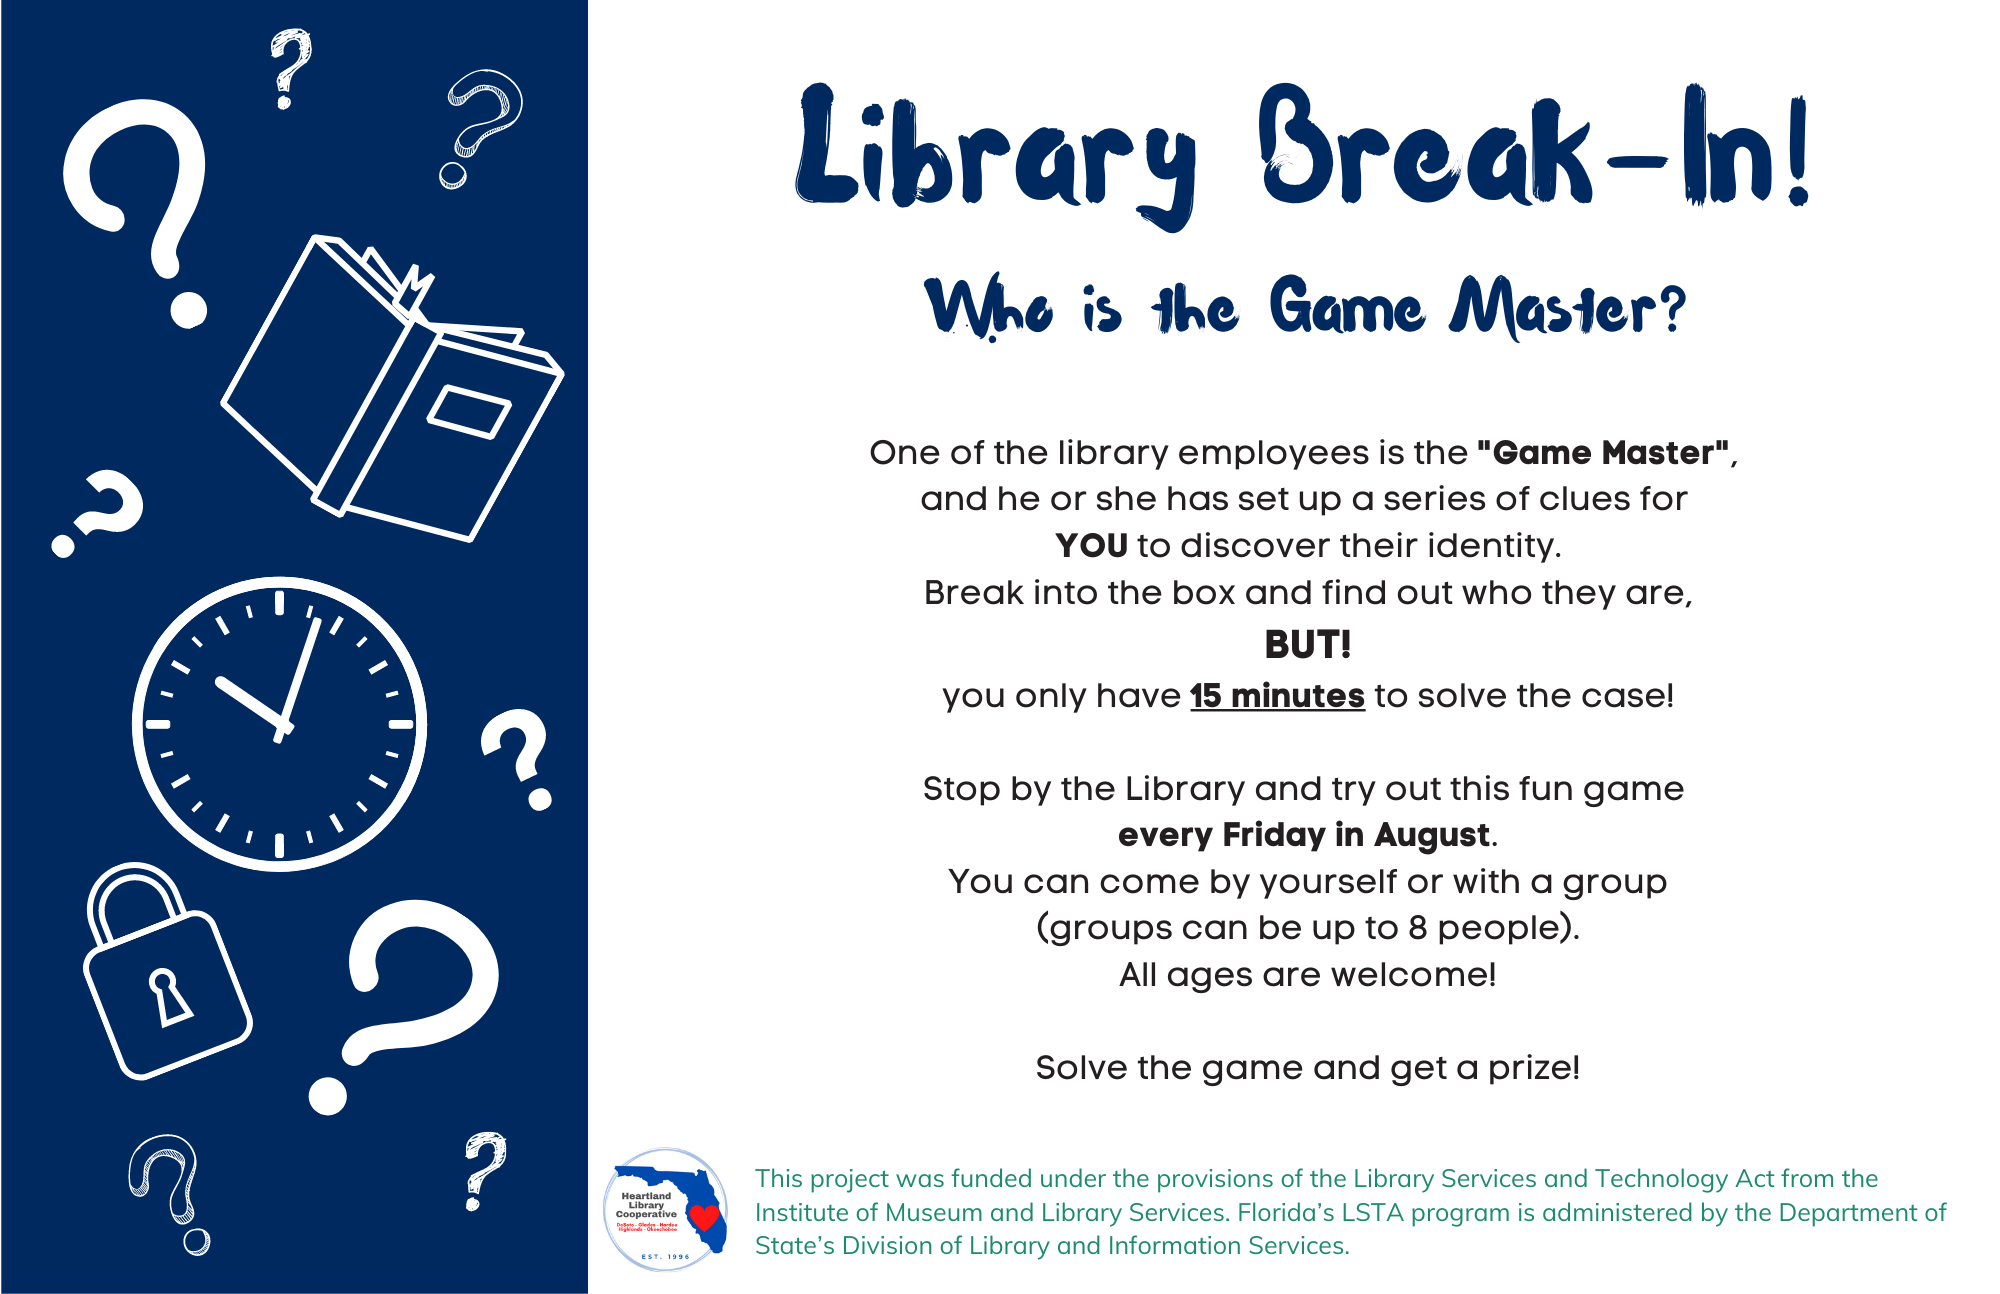 Library Break-In! Who is the Game Master?